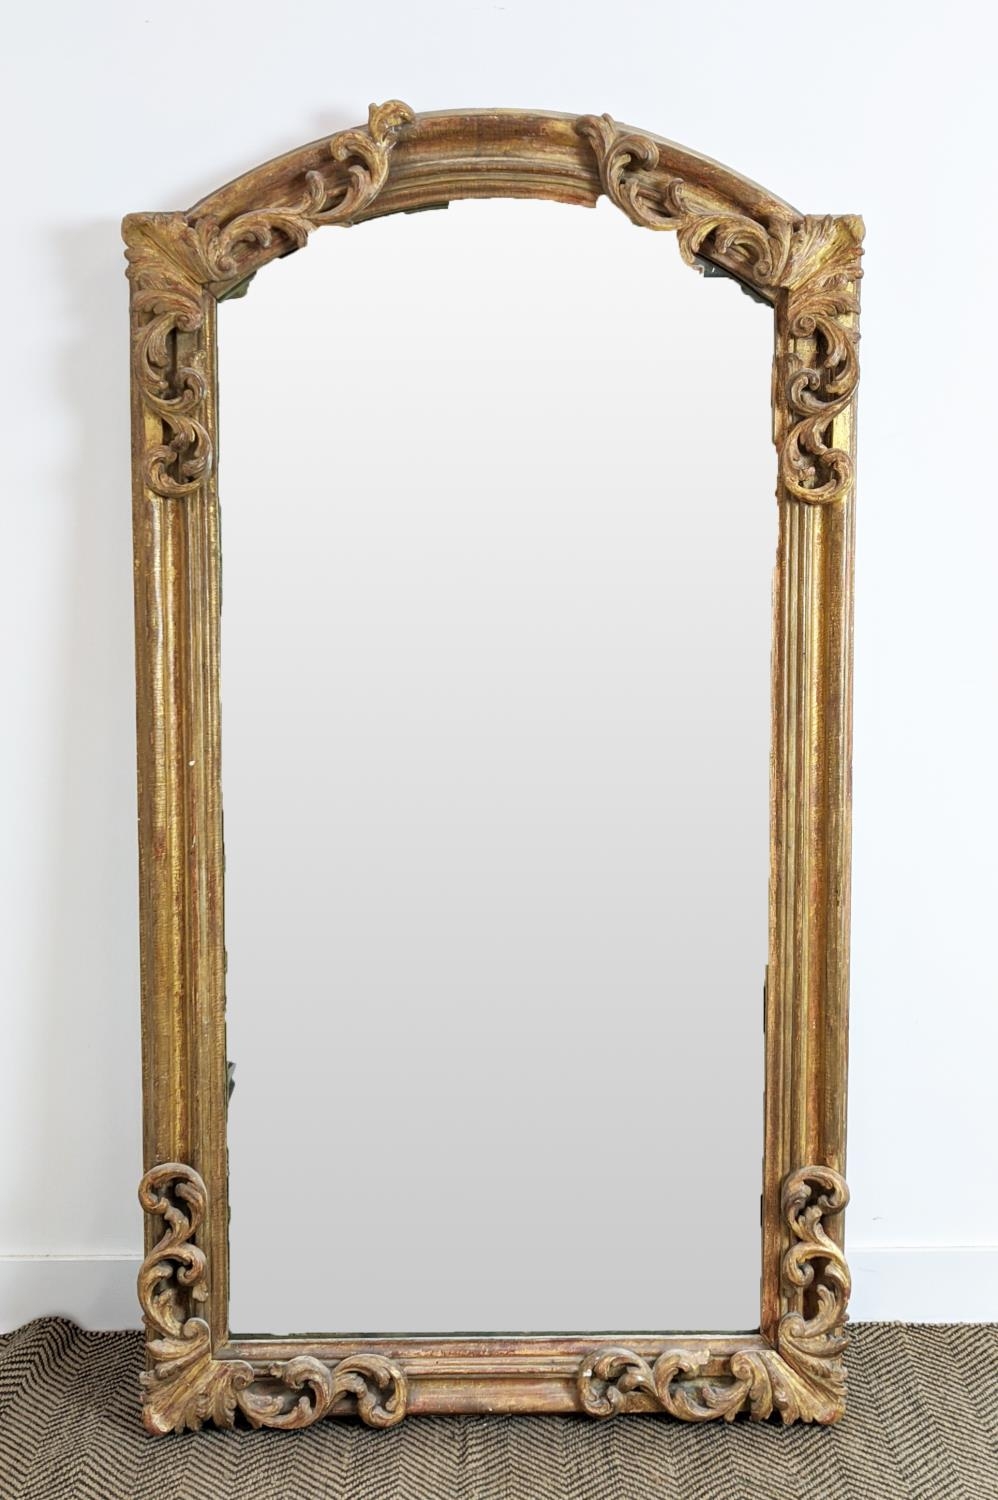 WALL MIRROR, early 19th century Continental giltwood and gesso with arched foliate scrolling frame - Image 3 of 12